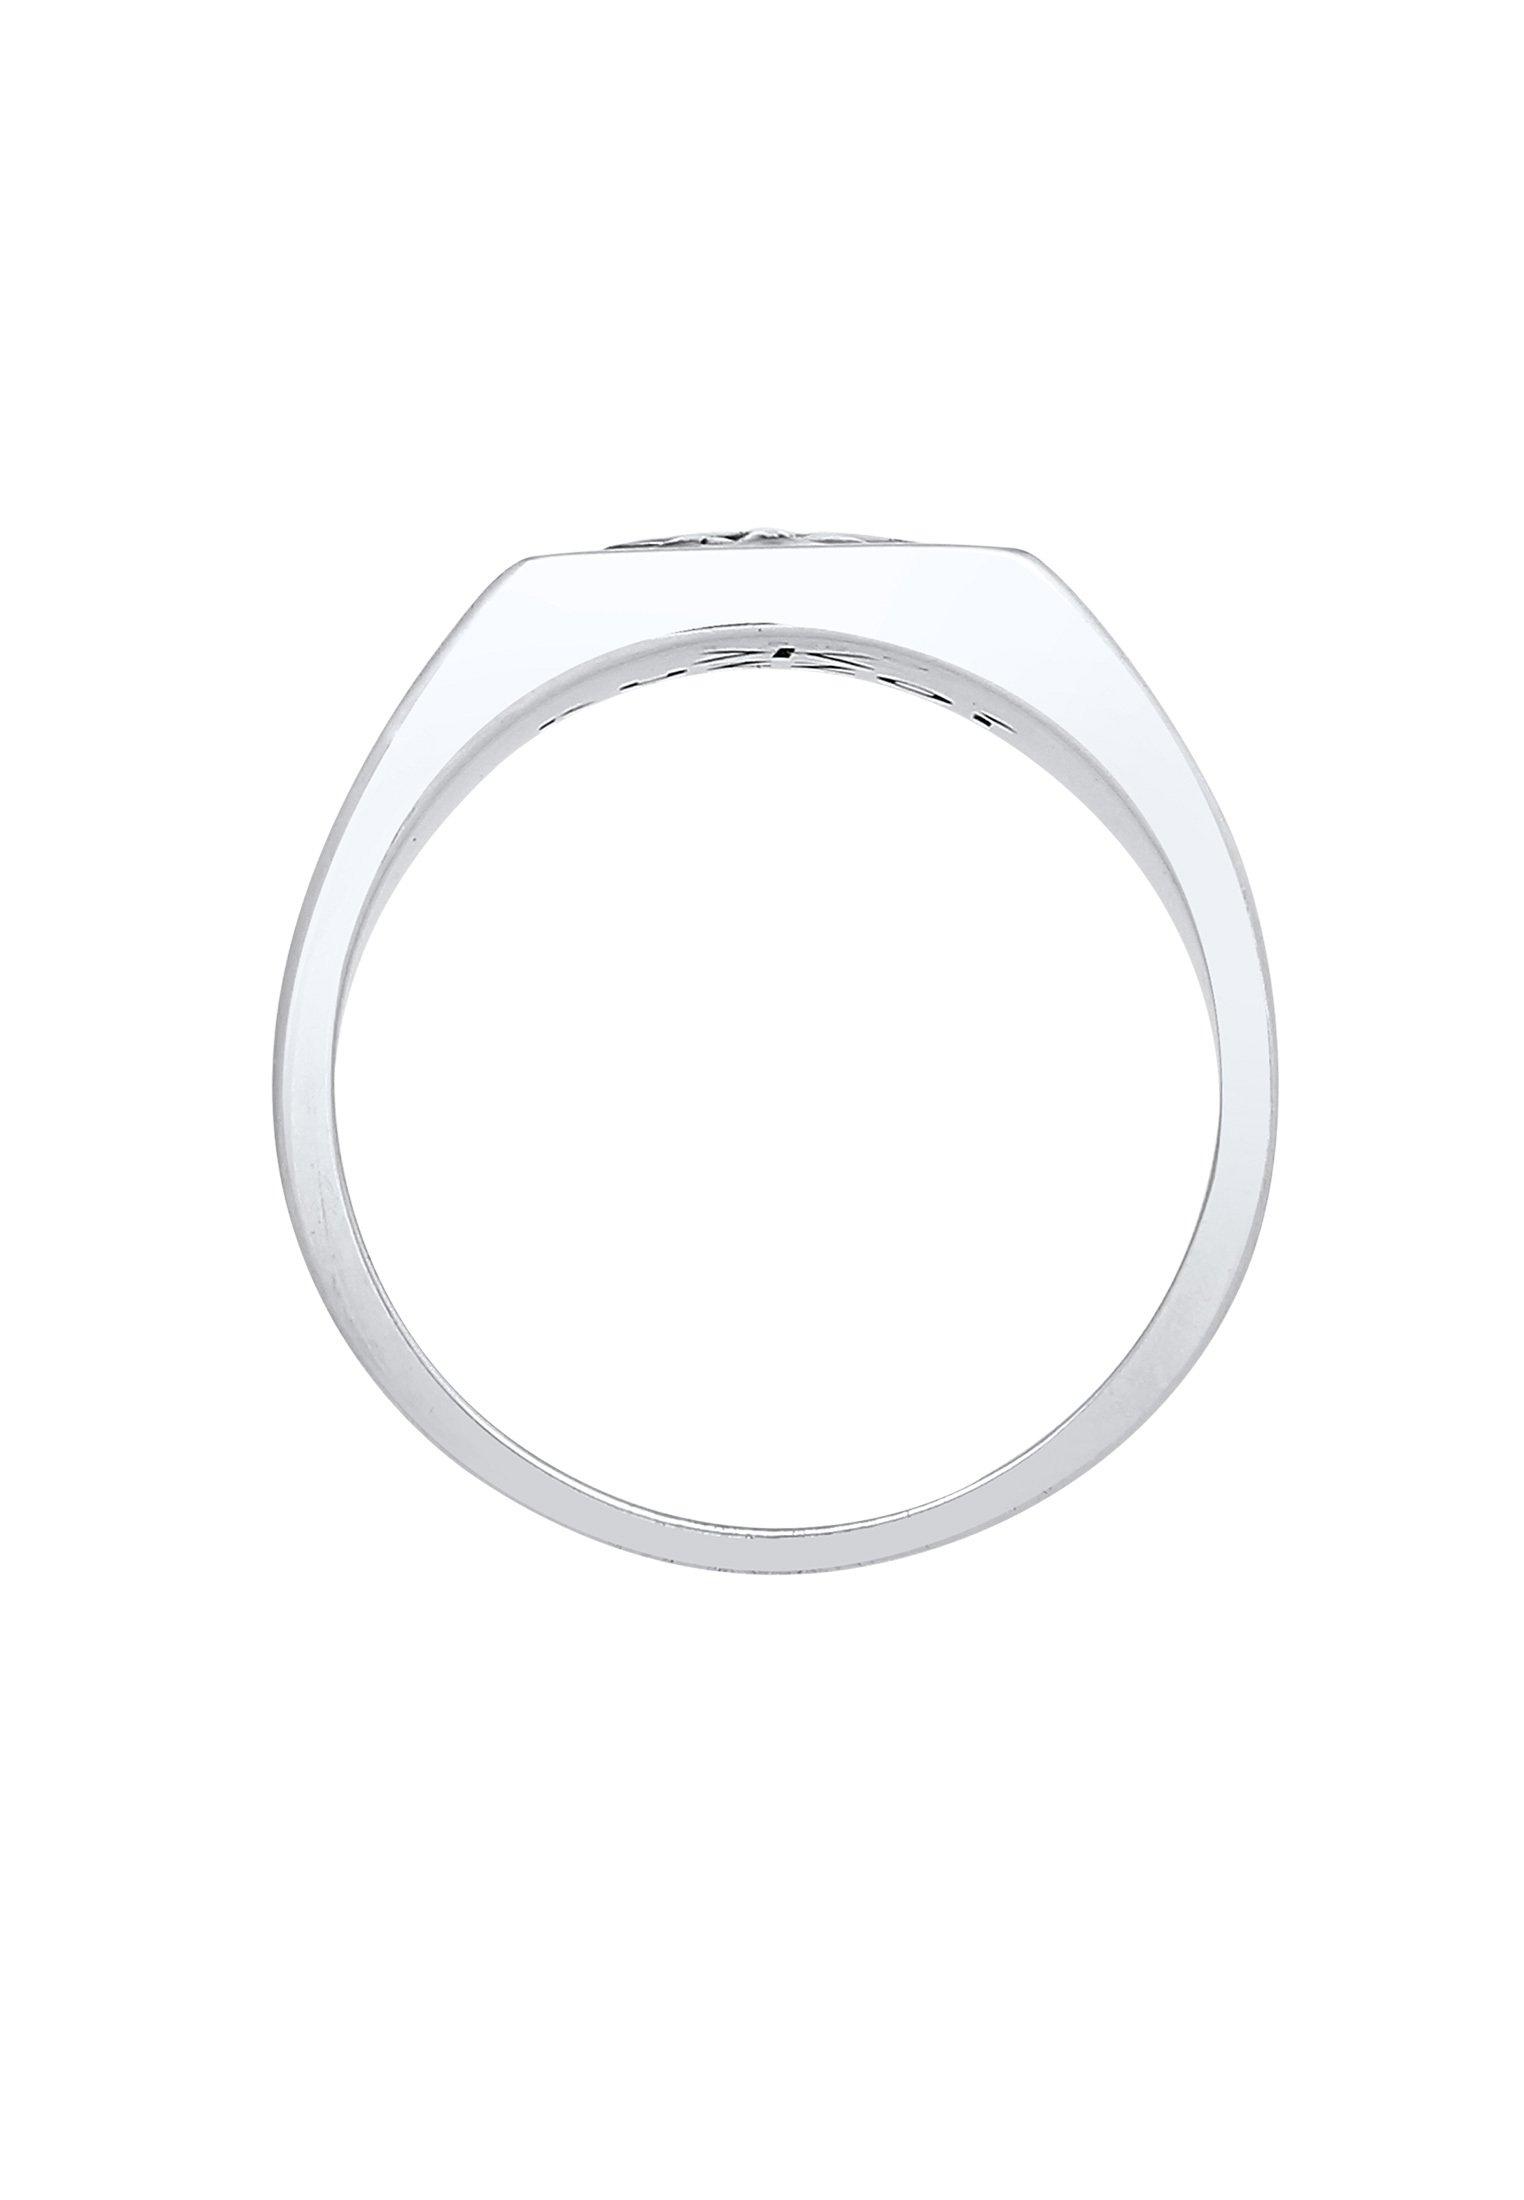 Kuzzoi  Ring  Siegelring Emaille Stern Basic 925 Silber 